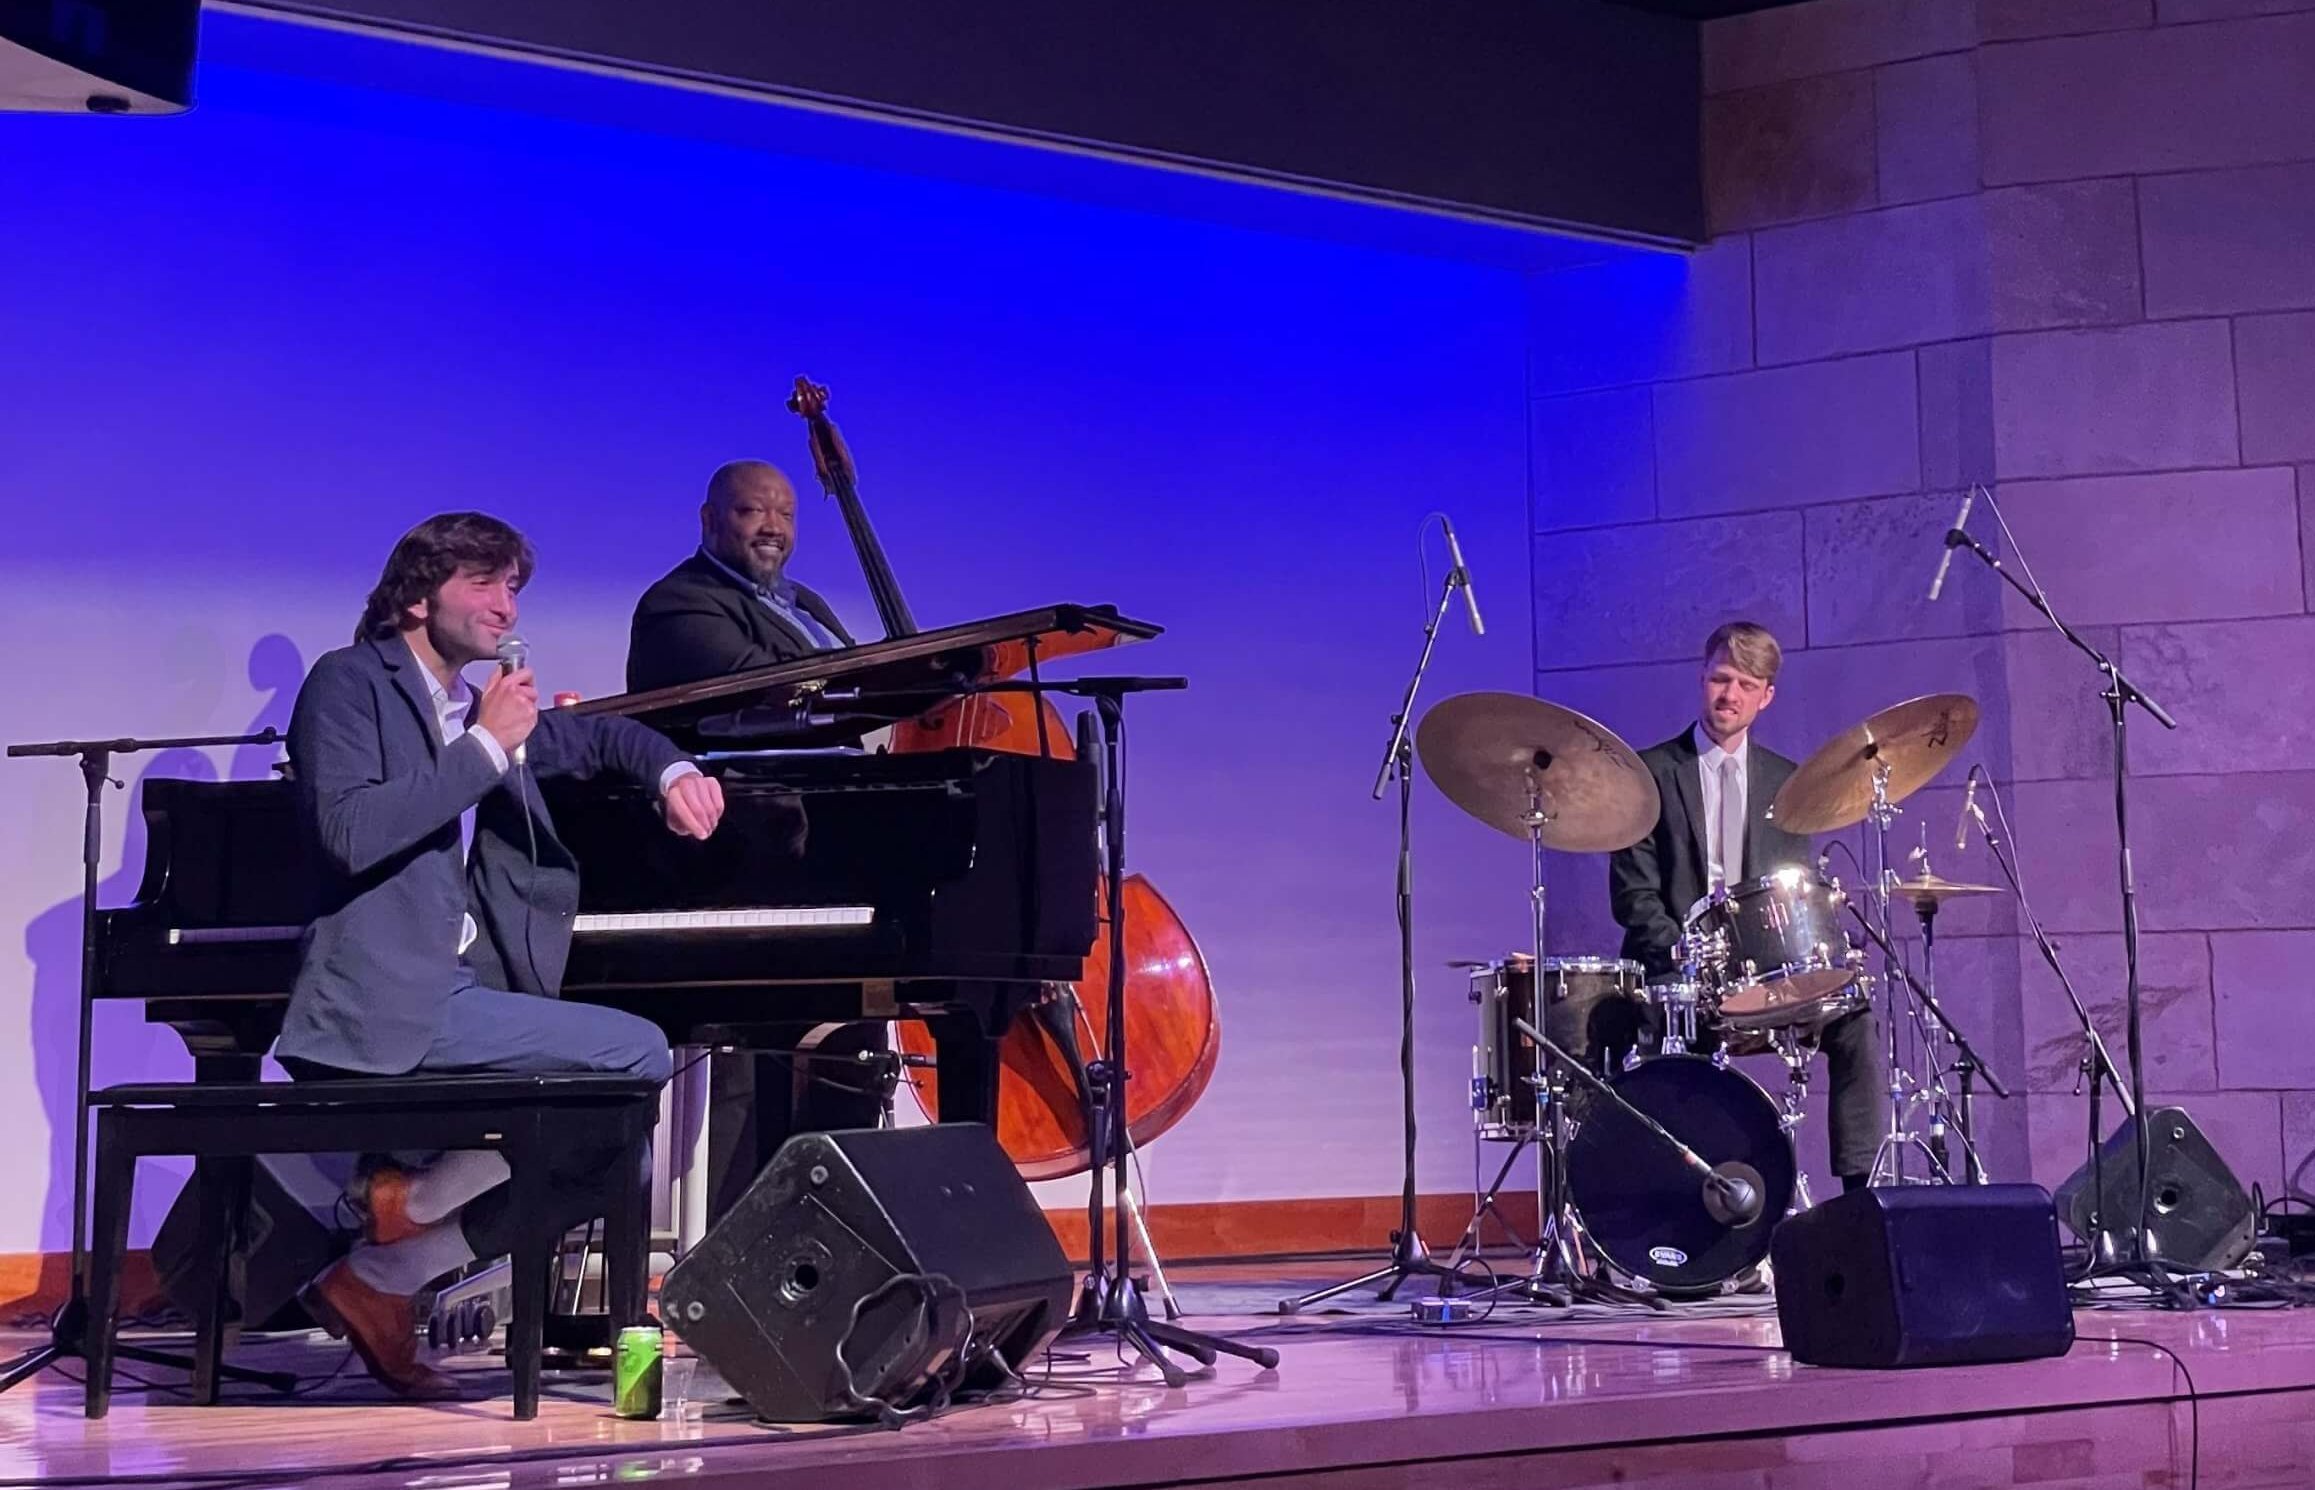 A three-piece jazz band plays music on a stage